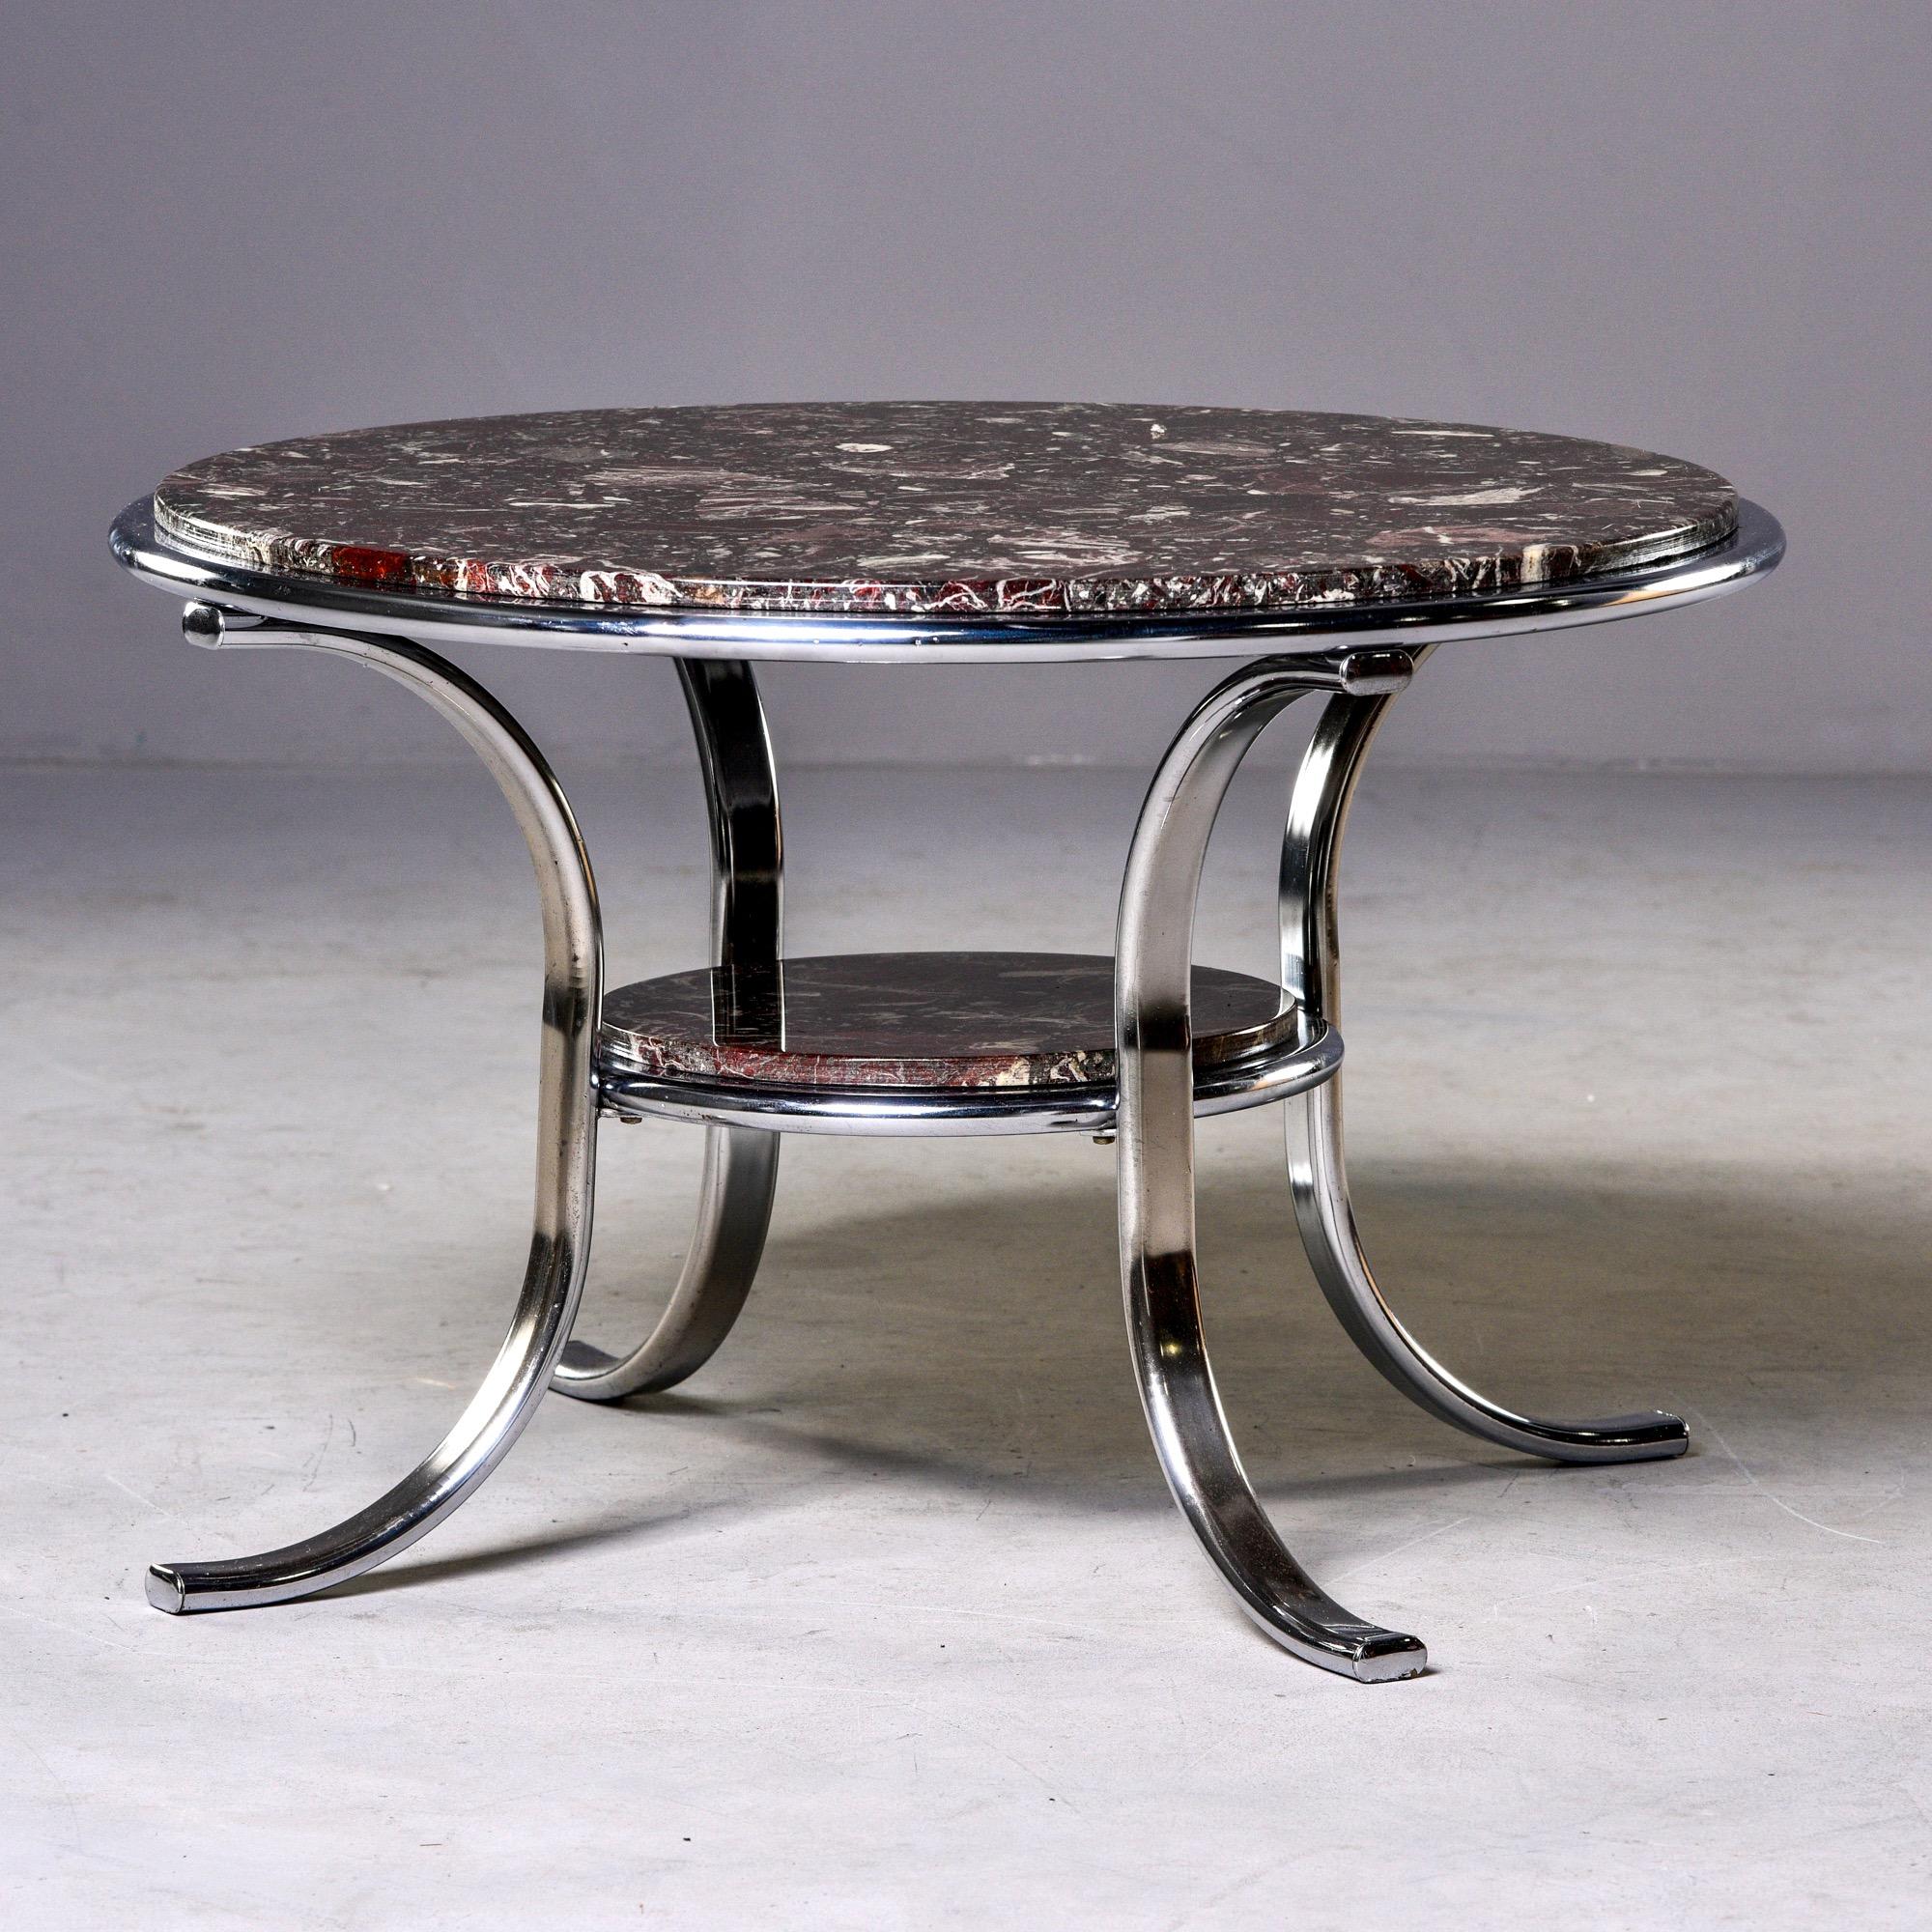 European Midcentury Two-Tier Polished Nickel and Marble Cocktail Table